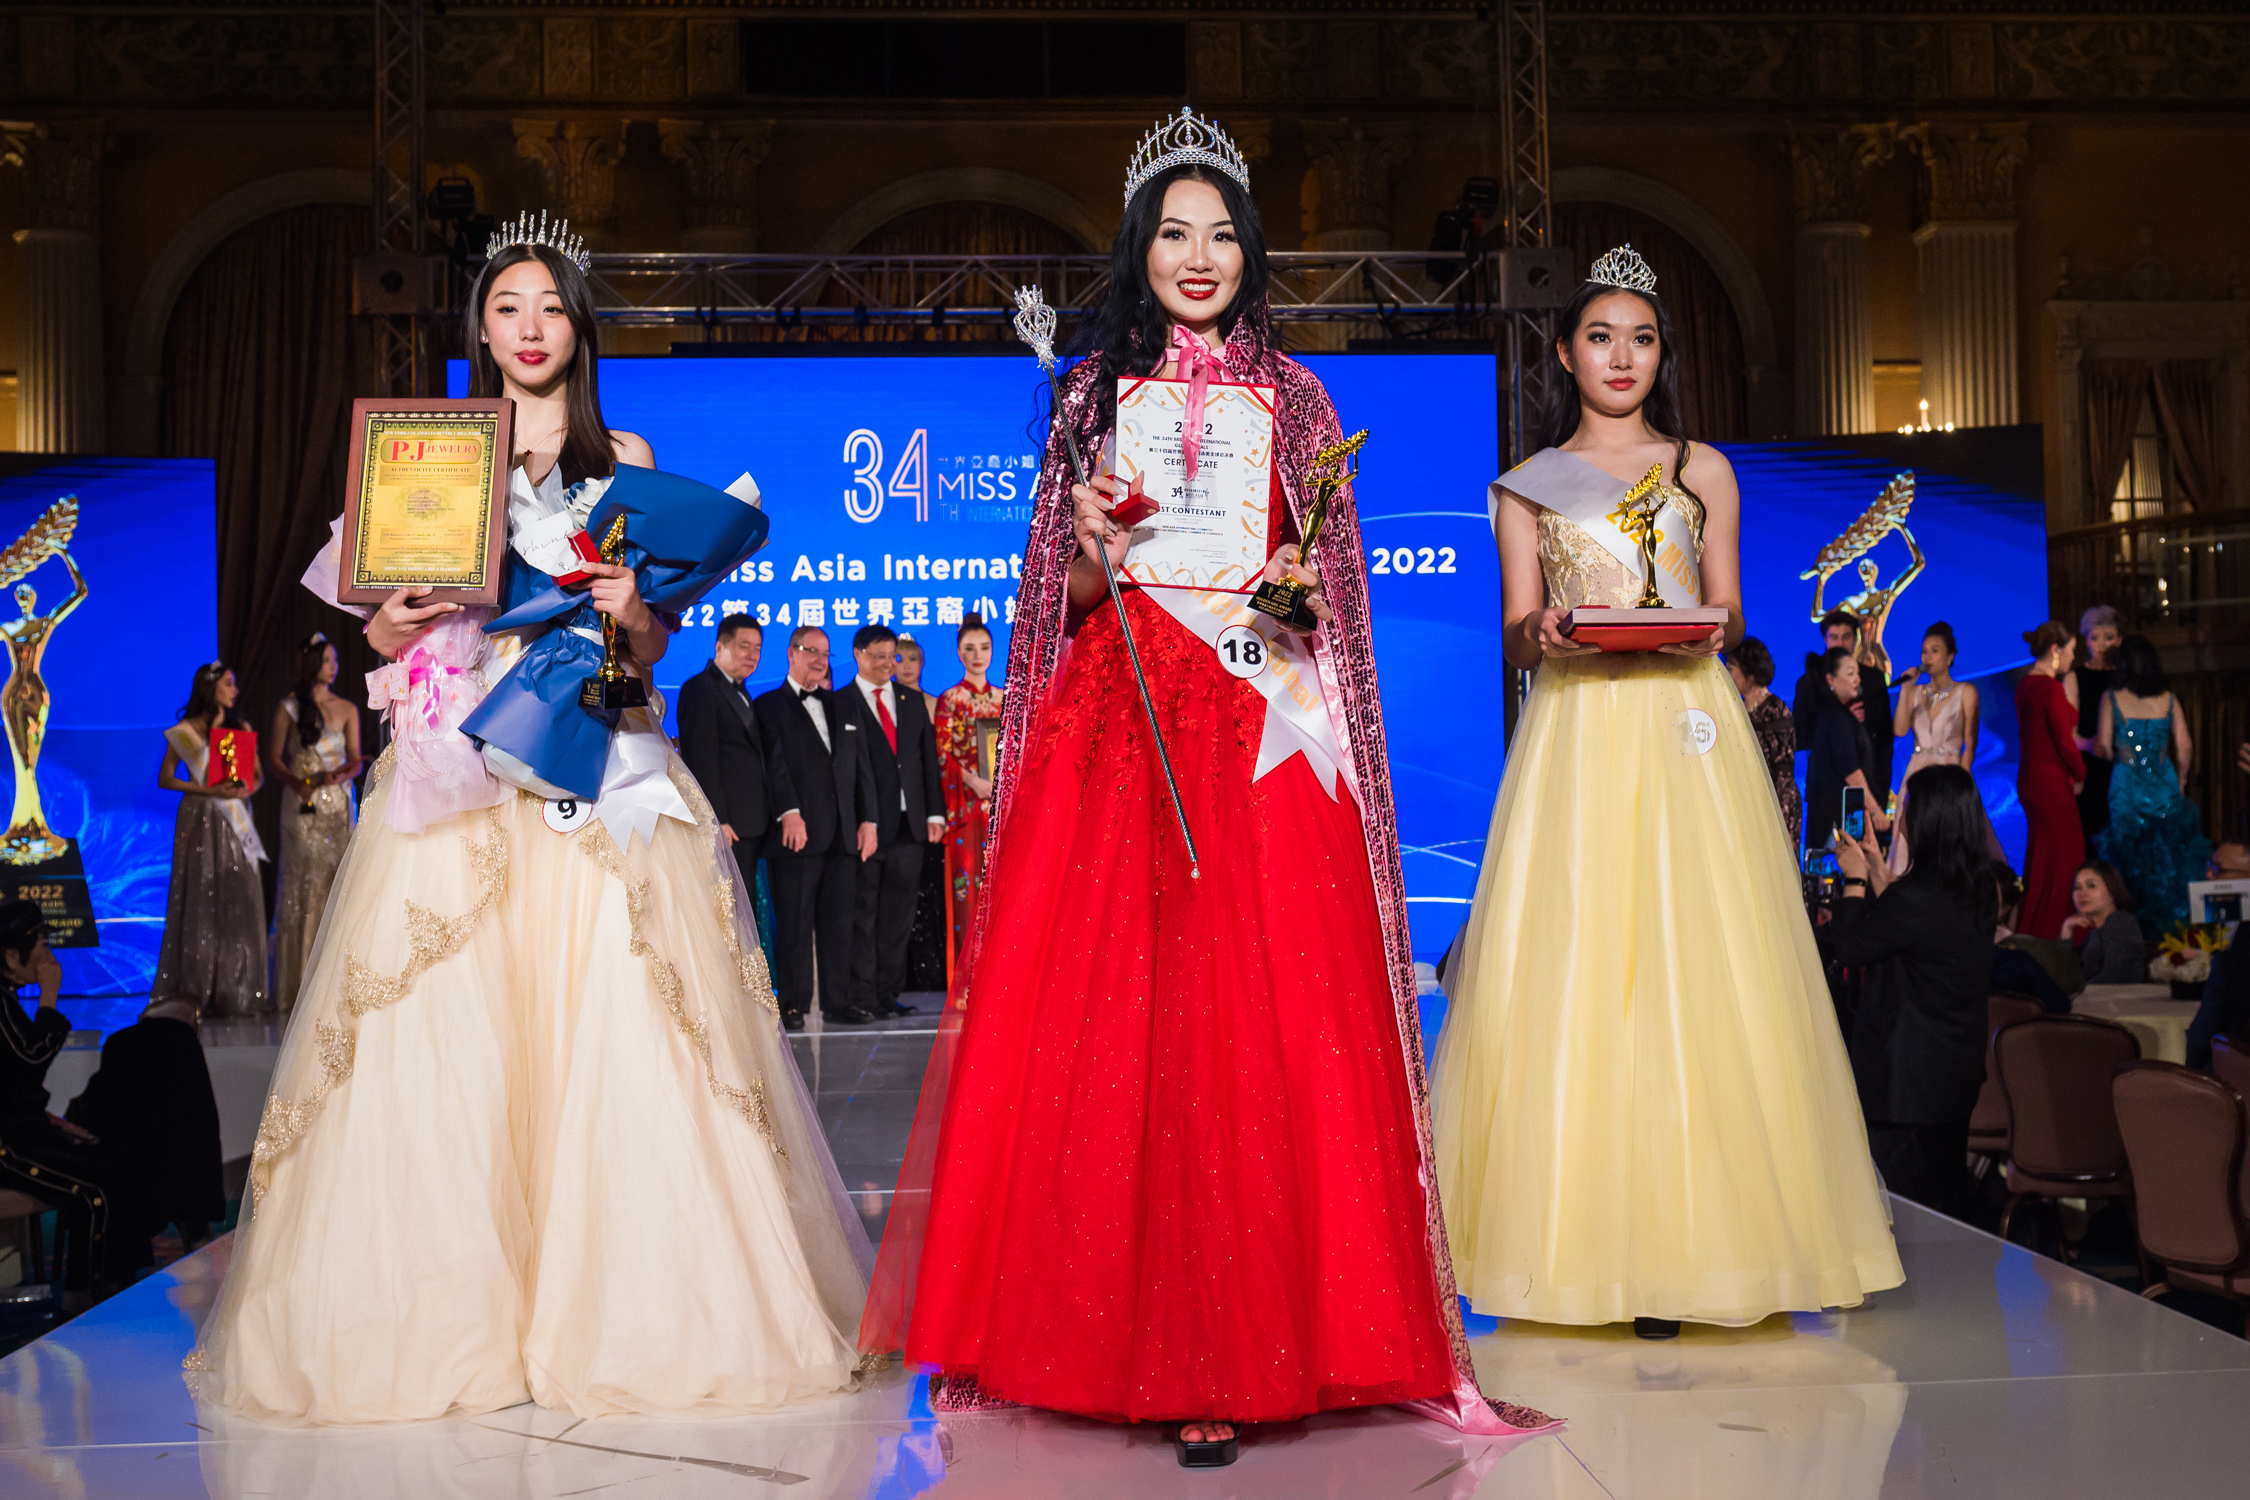 The 34th Miss Asia International Global Final Los Angeles ended successfully